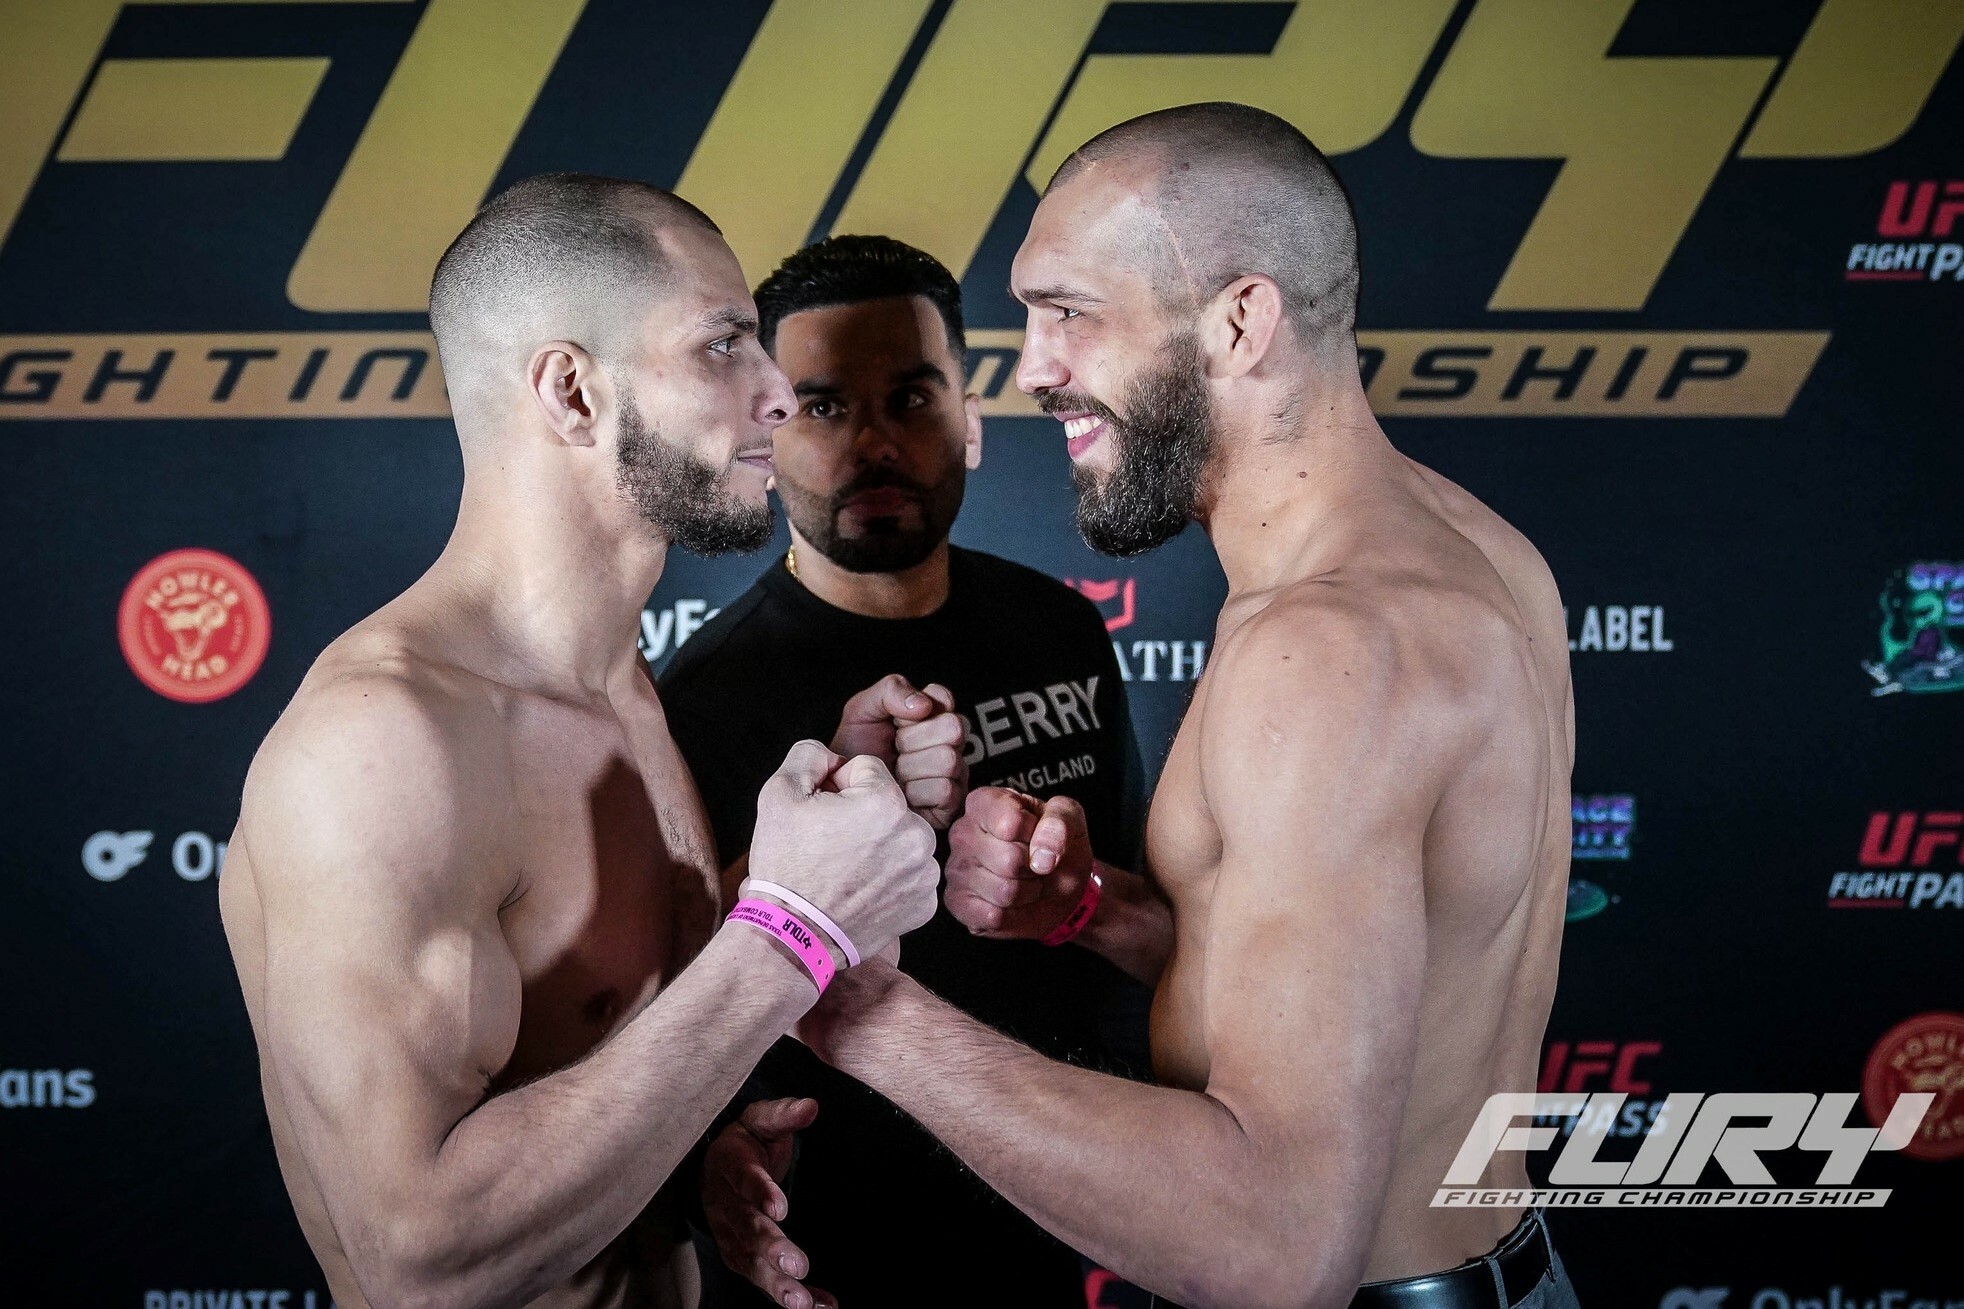 Fury FC 75 Results - Cutts vs Hafez